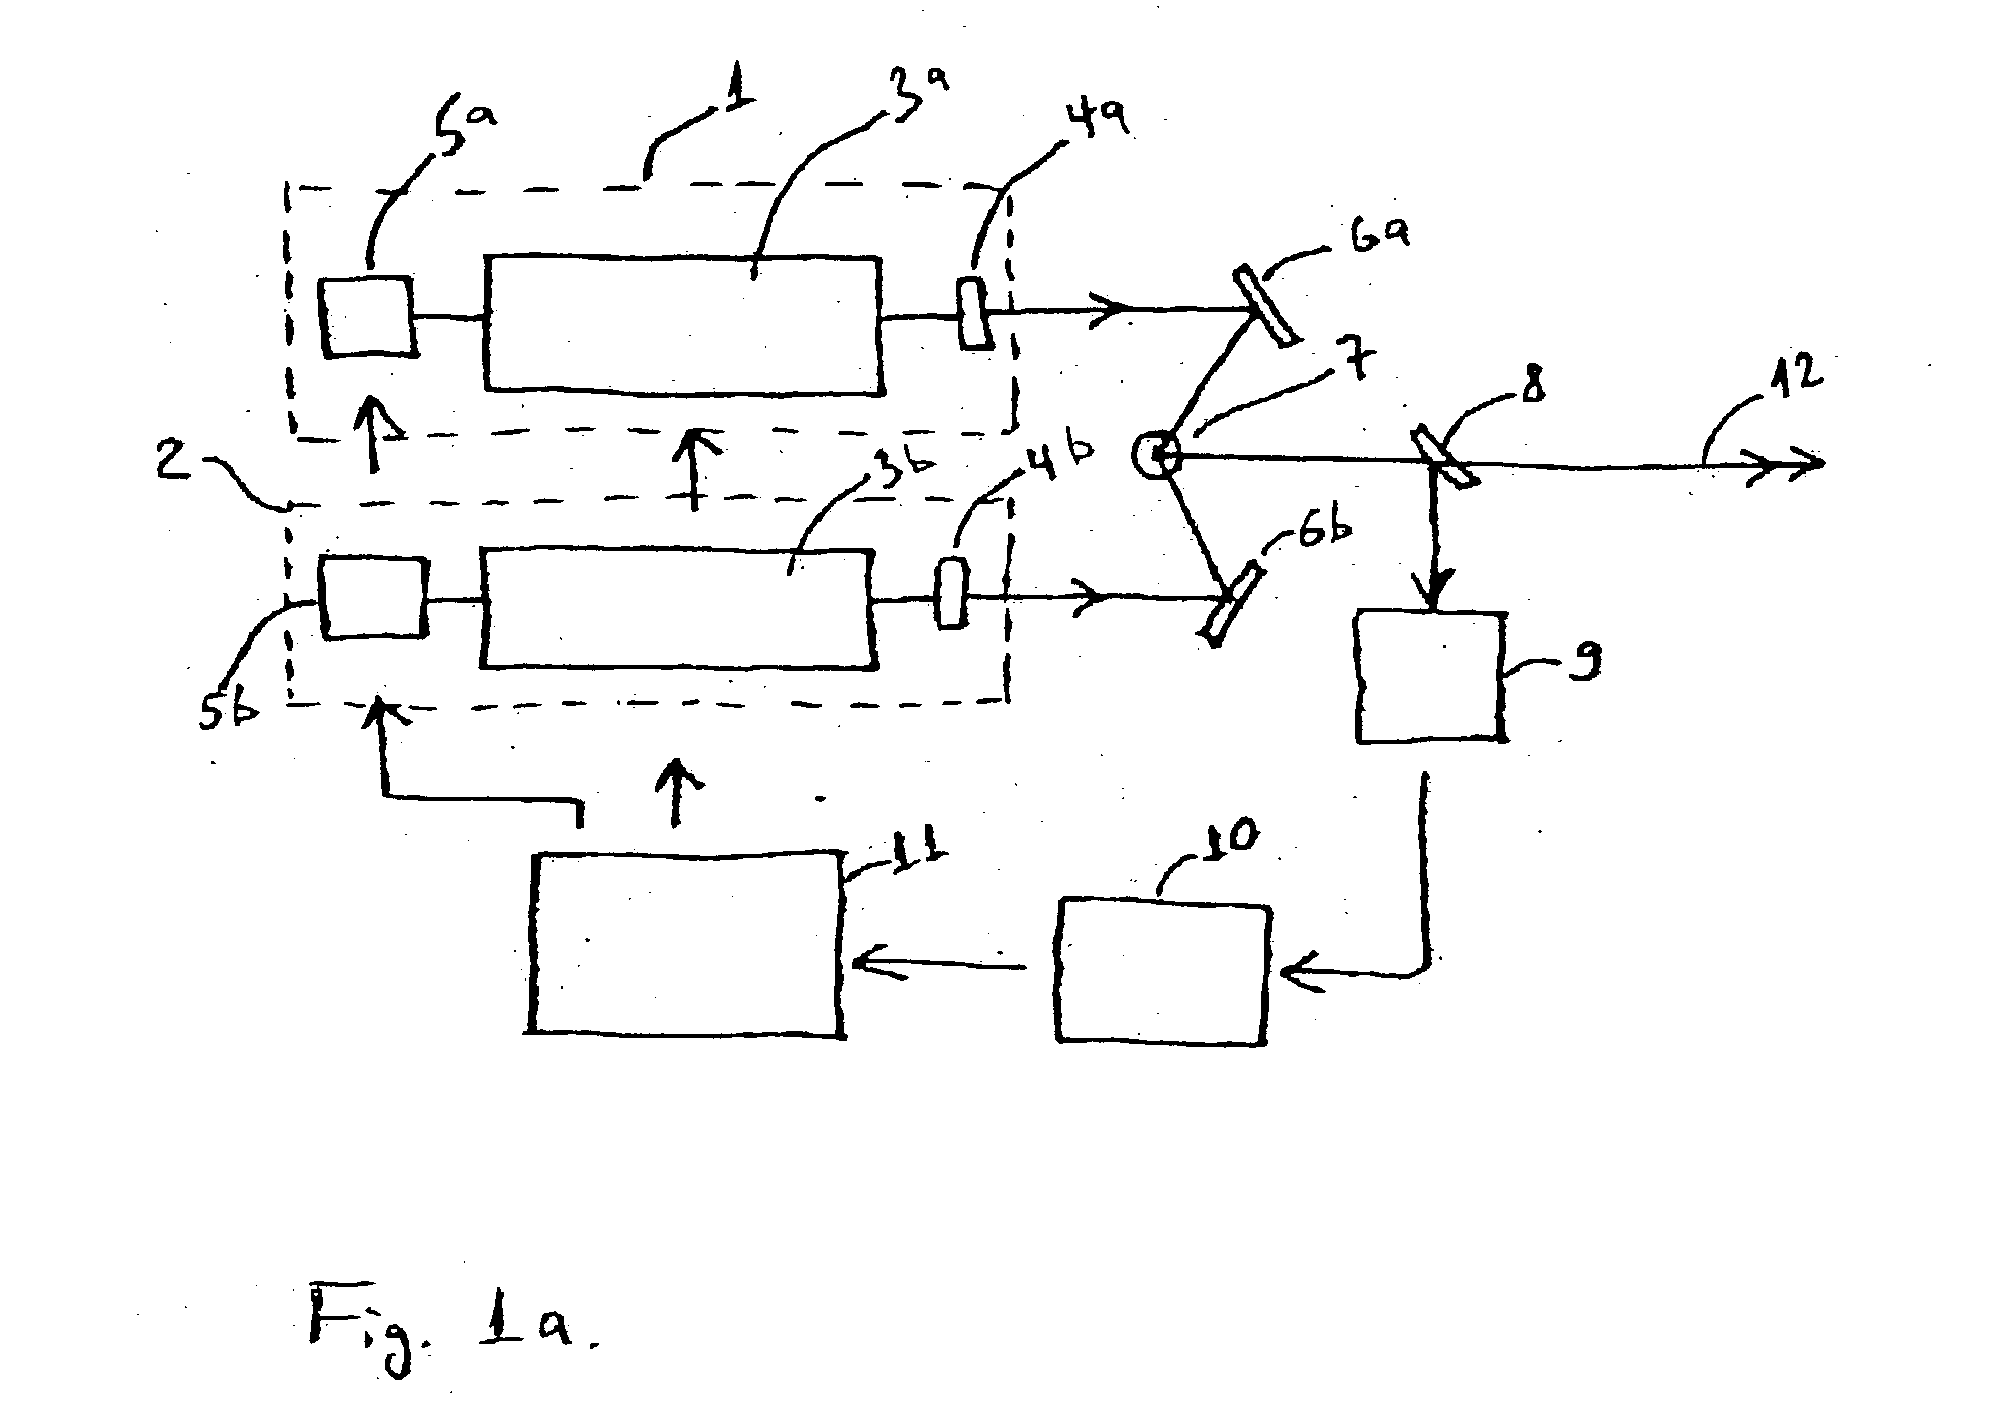 Excimer or molecular fluorine laser system with multiple discharge units